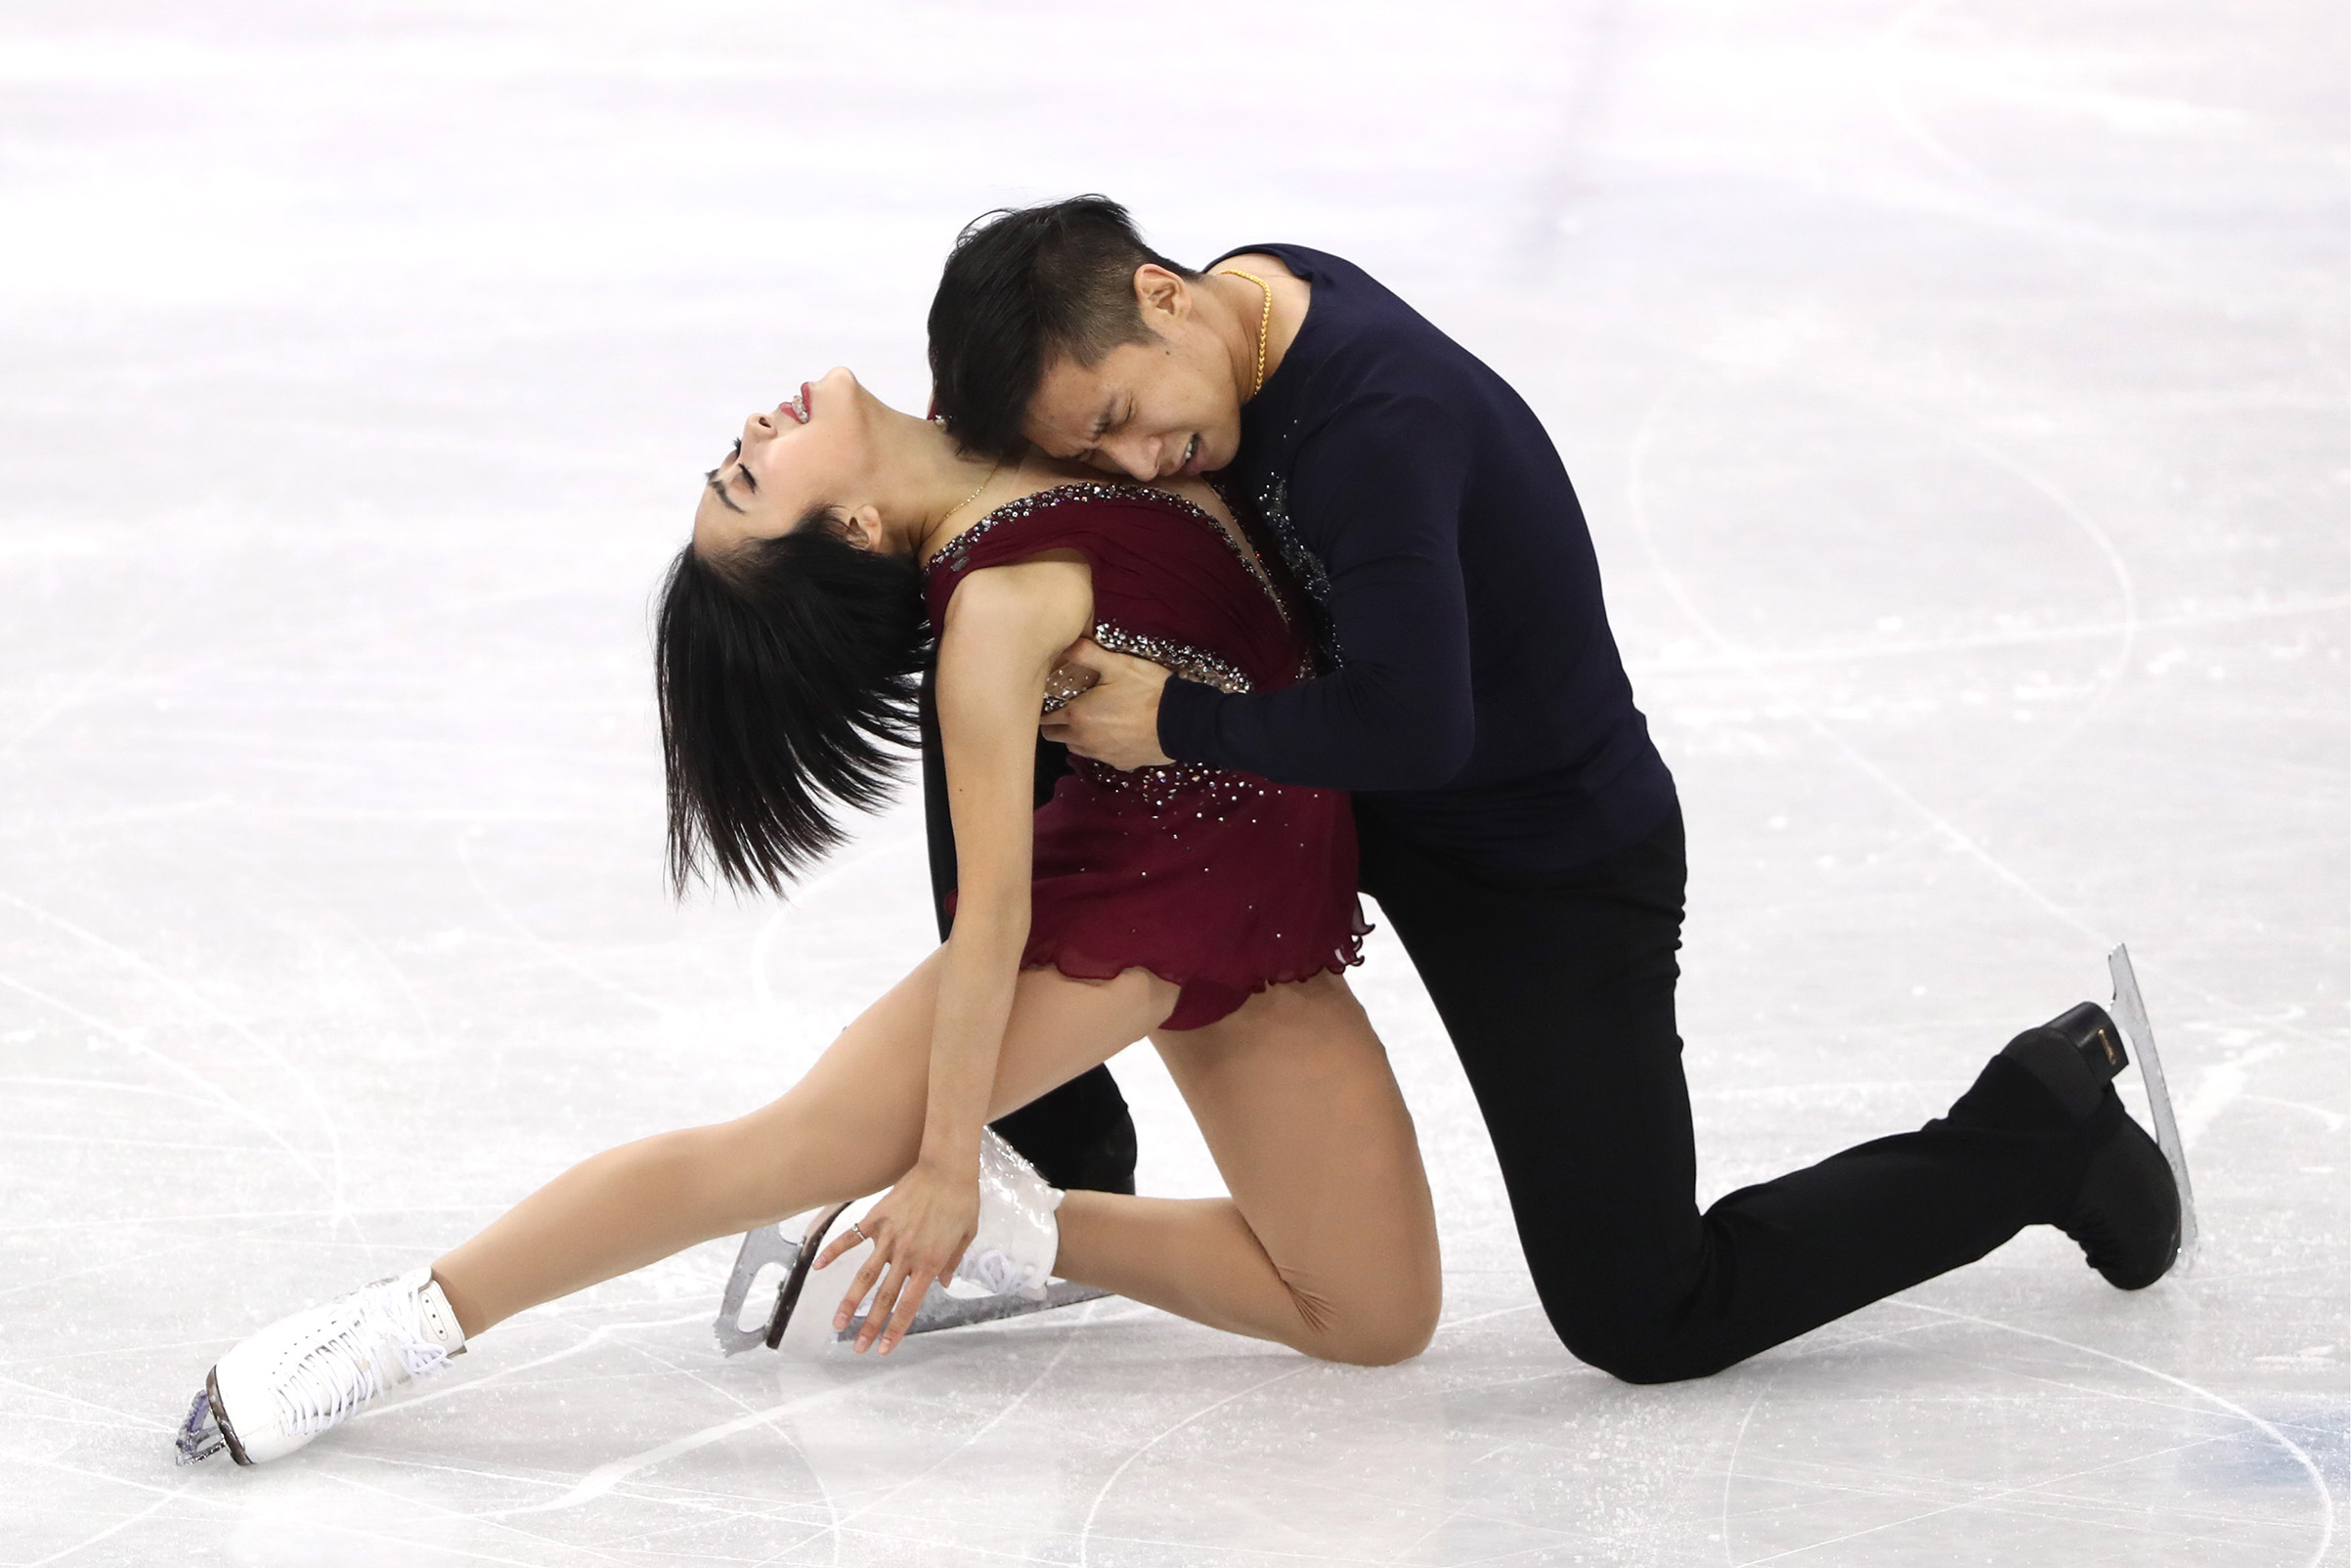 China's pair skaters Sui Wenjing and Han Cong perform their short program during a figure skating event at the 2018 Winter Olympic Games at Gangneung Ice Arena. (Valery Sharifulin—TASS/Getty Images)